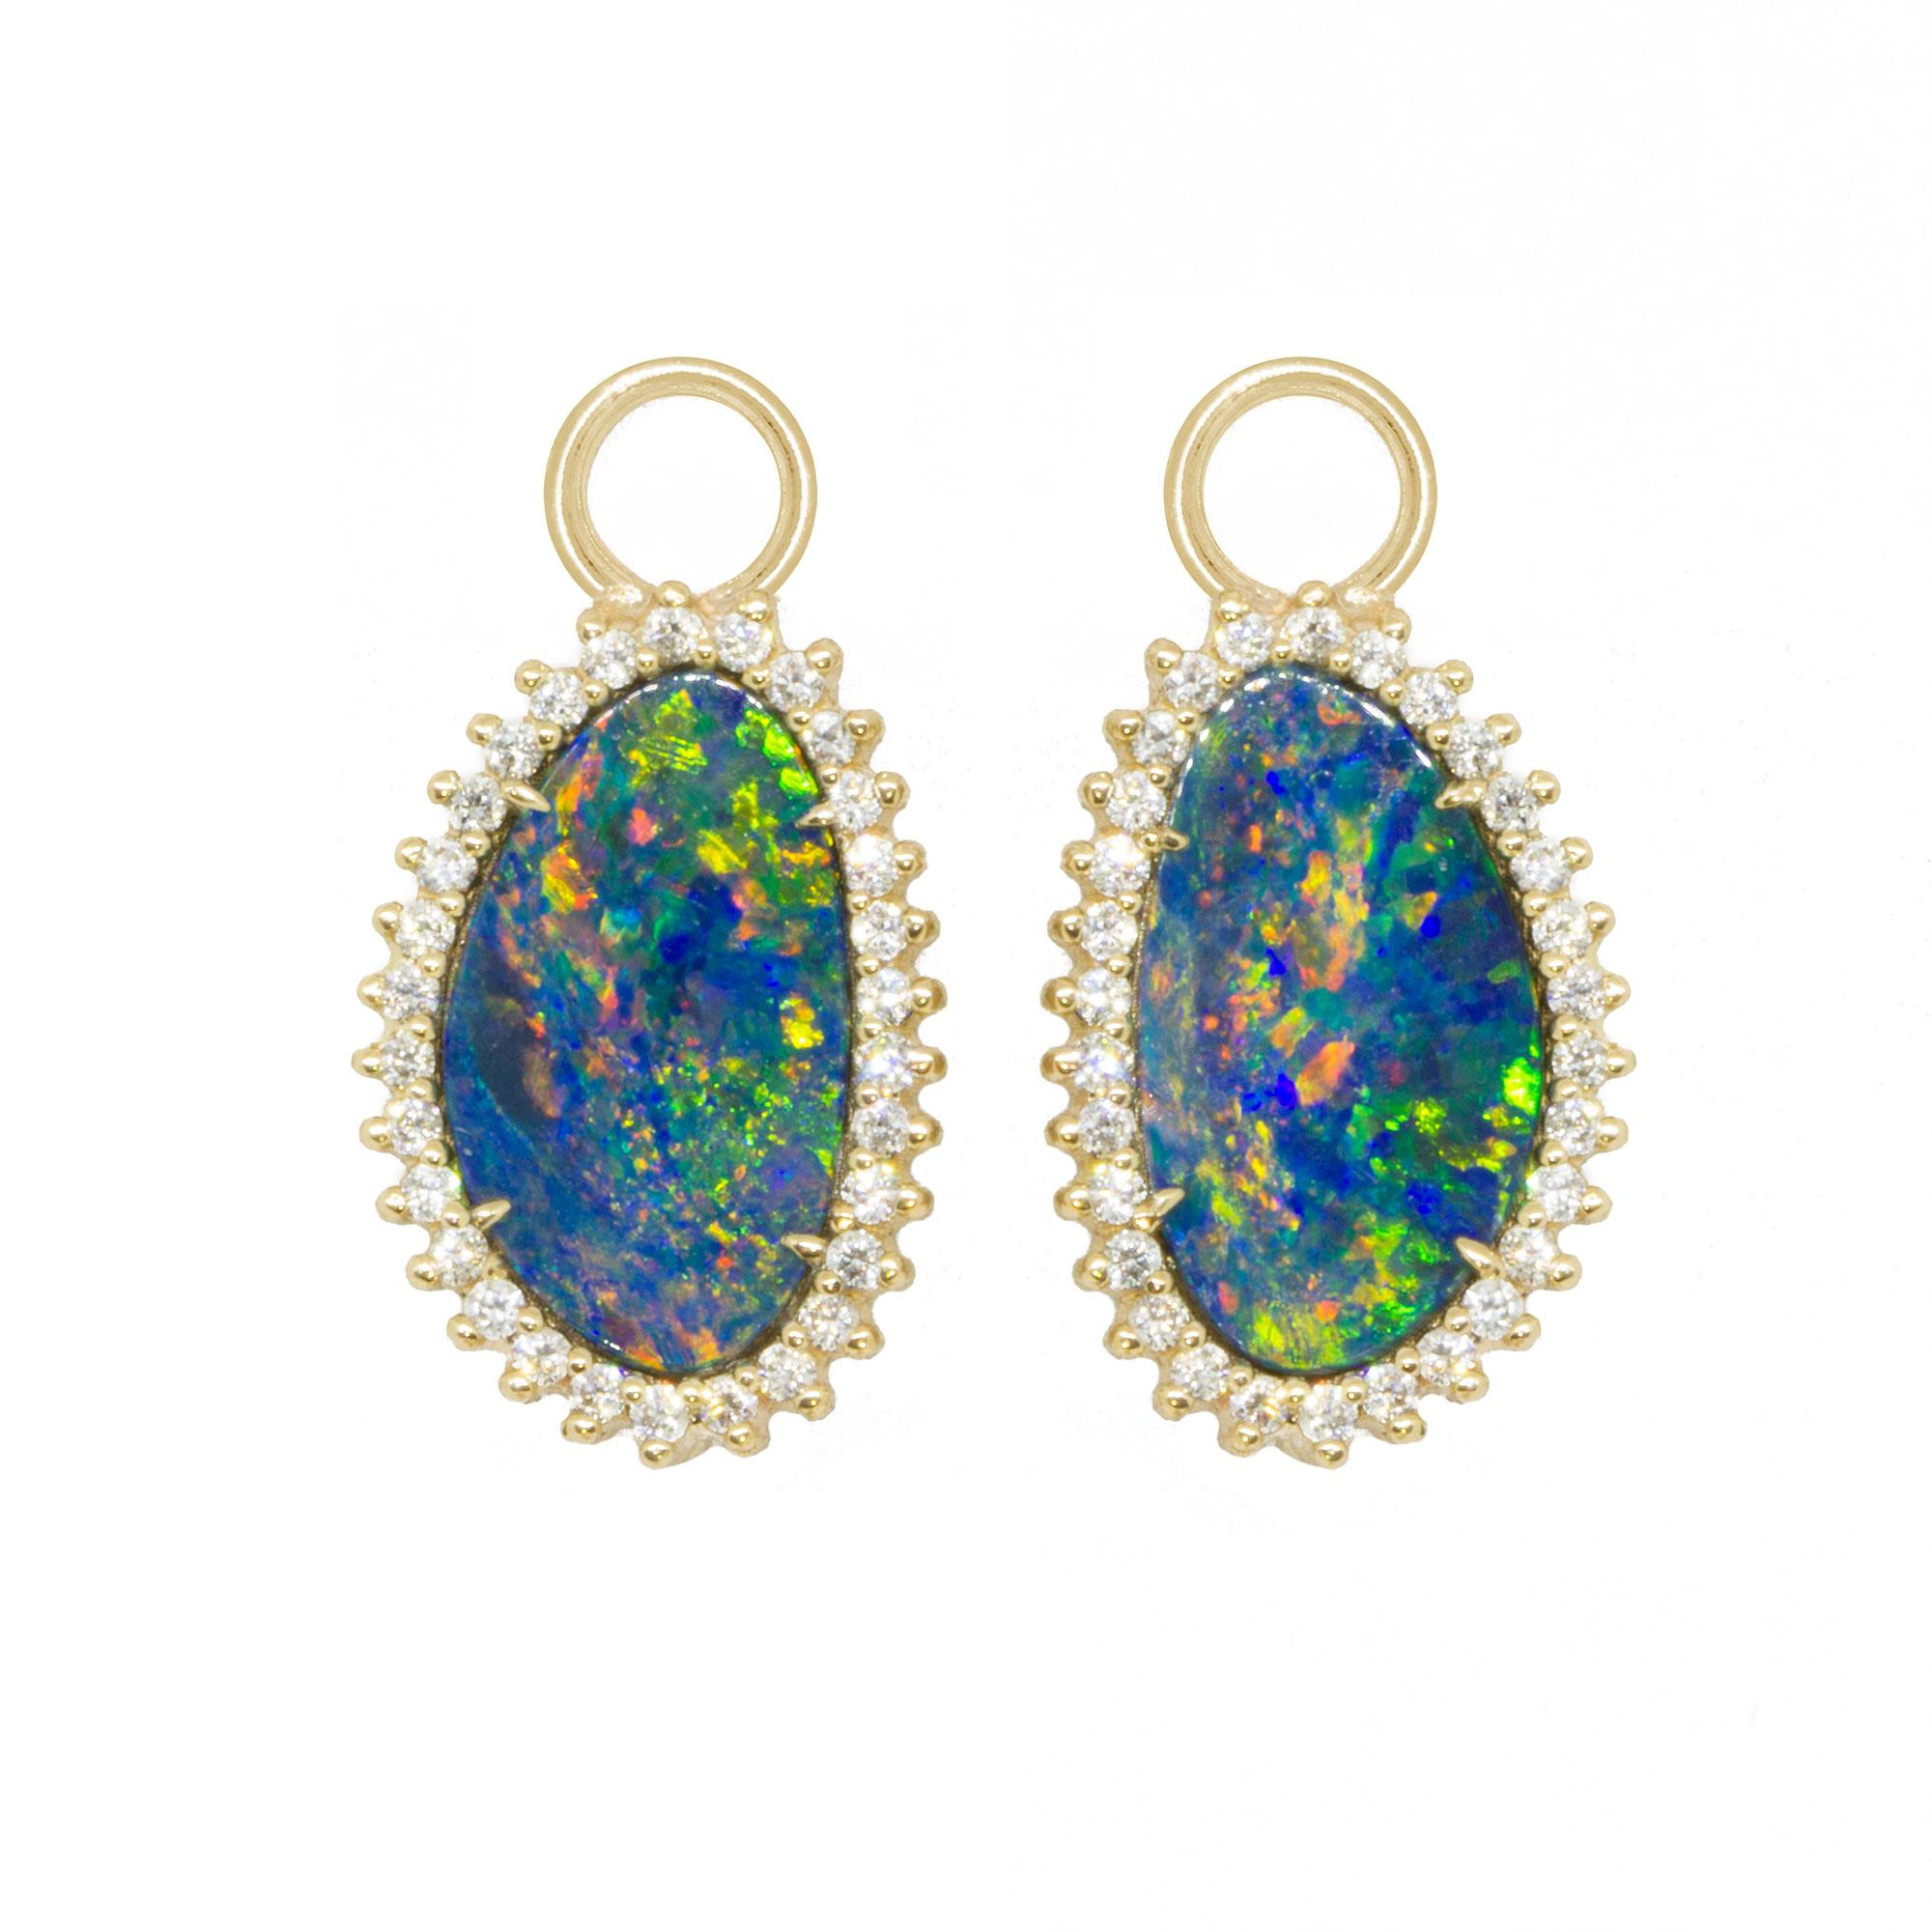 Brilliant Cut Organic Opal Charms and The Zen Gold 18 Karat Reversible Huggies Earrings For Sale